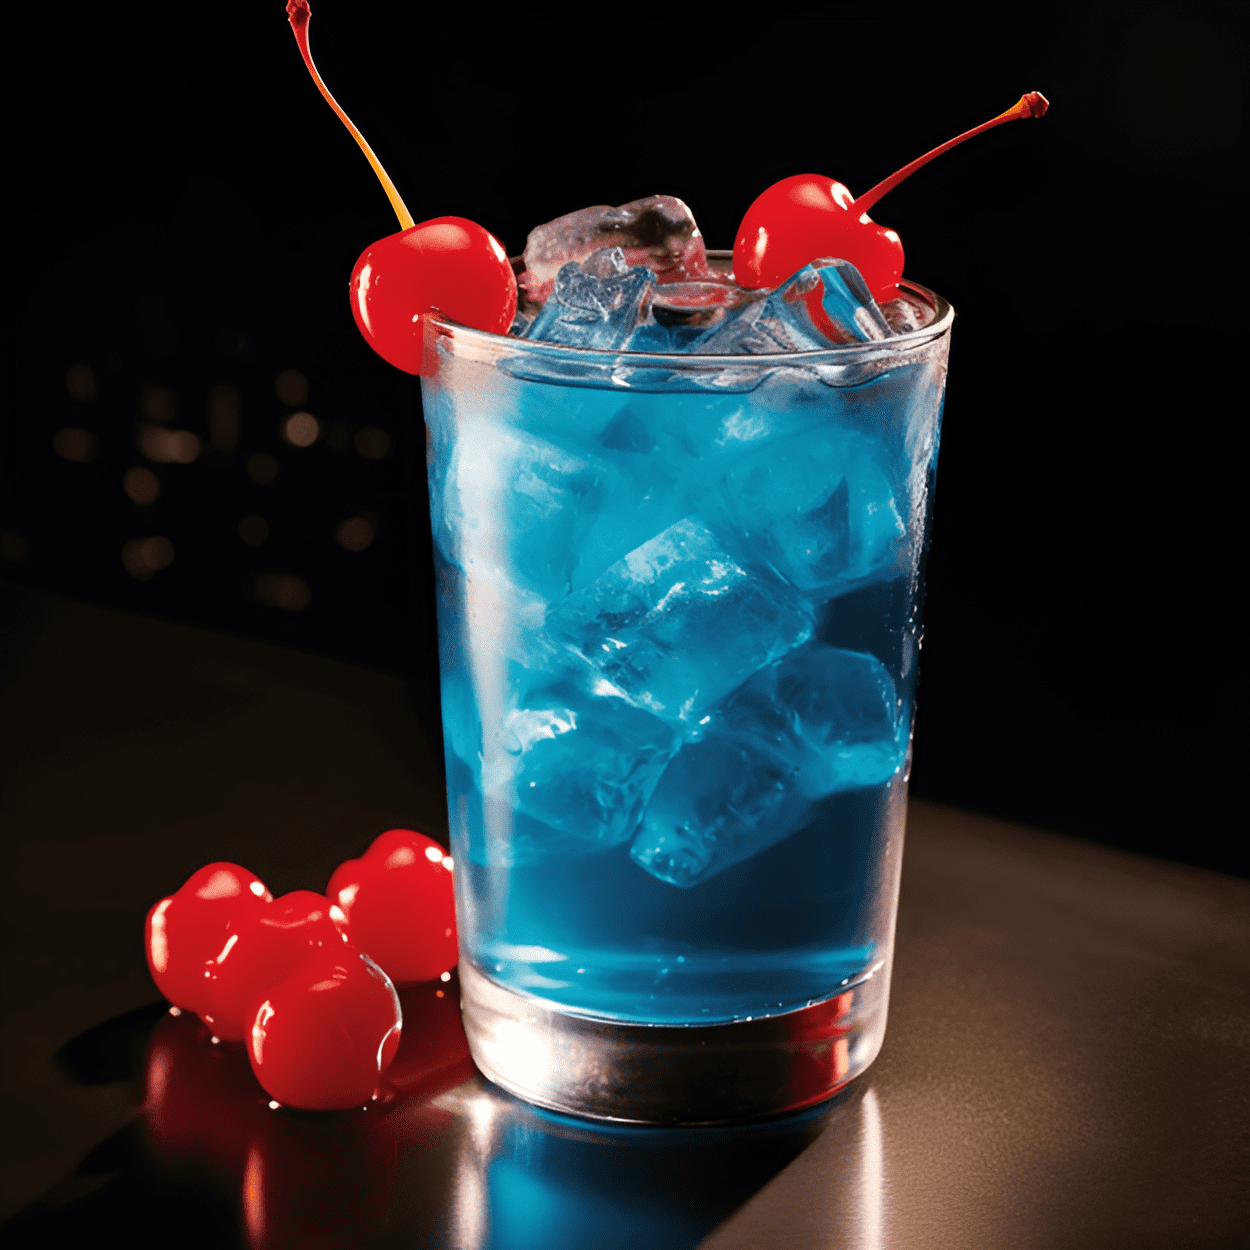 Super Man Cocktail Recipe - The Super Man cocktail is a sweet and fruity drink with a vibrant blue color. It has a strong taste of pineapple and coconut, with a hint of citrus. The taste is smooth and refreshing, with a slight kick from the vodka.